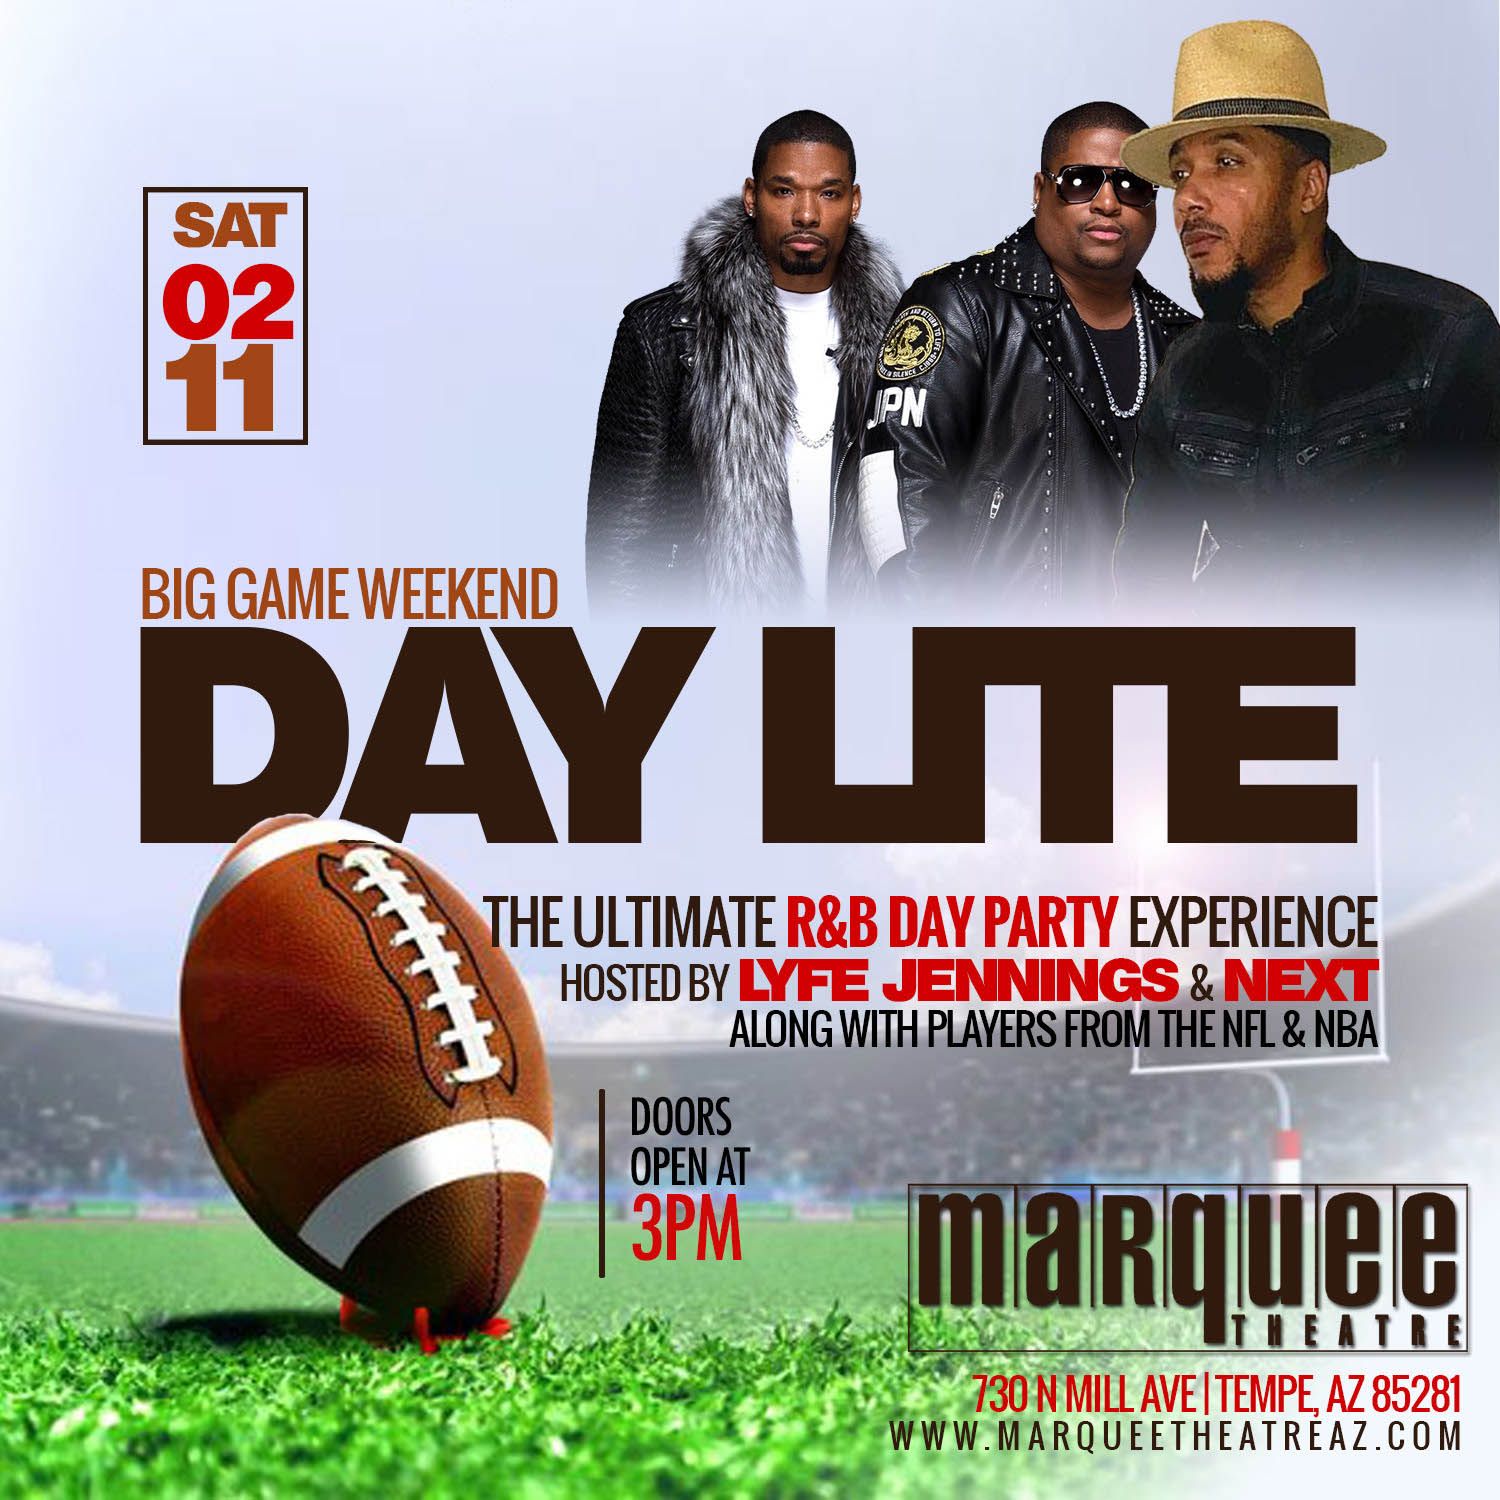 R&B Day Party at Marquee Theatre